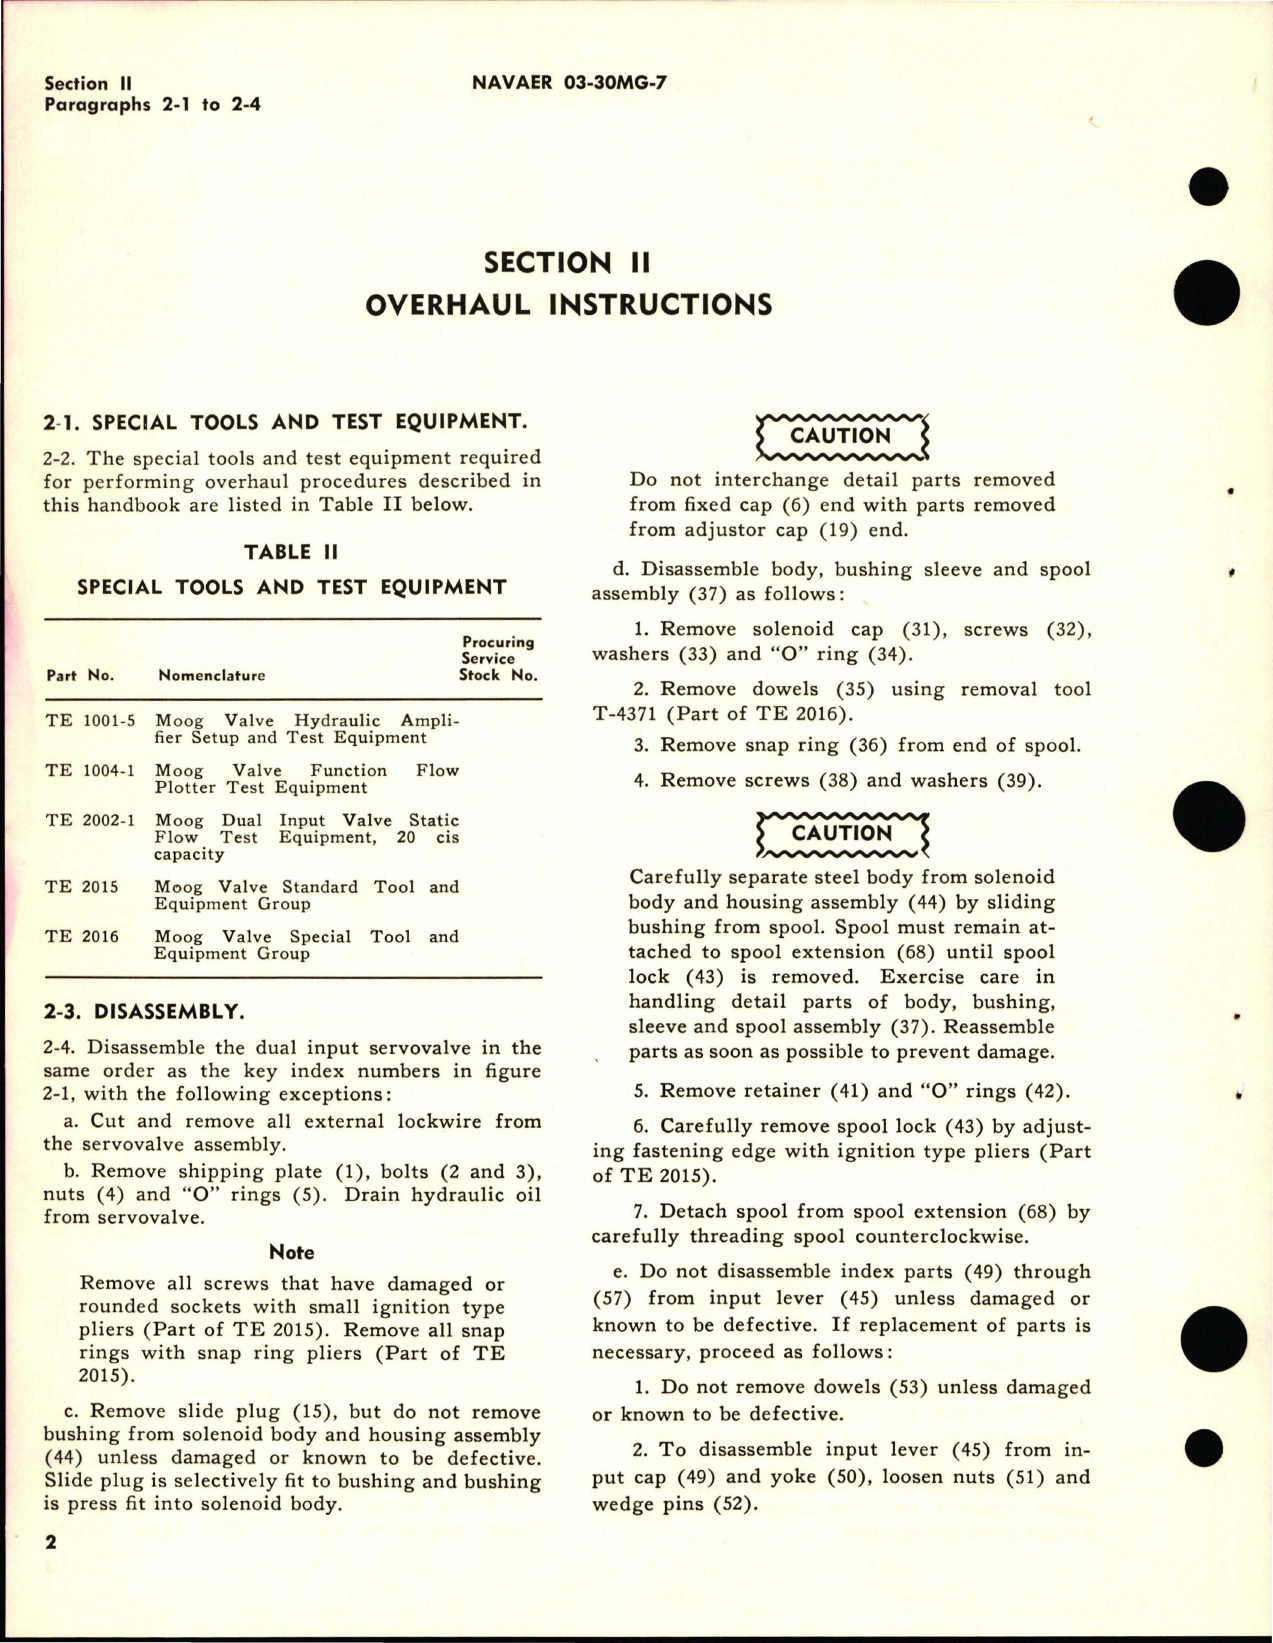 Sample page 6 from AirCorps Library document: Overhaul Instructions for Dual Input Servovalve Assembly - Model 10-100B - Part M-7527